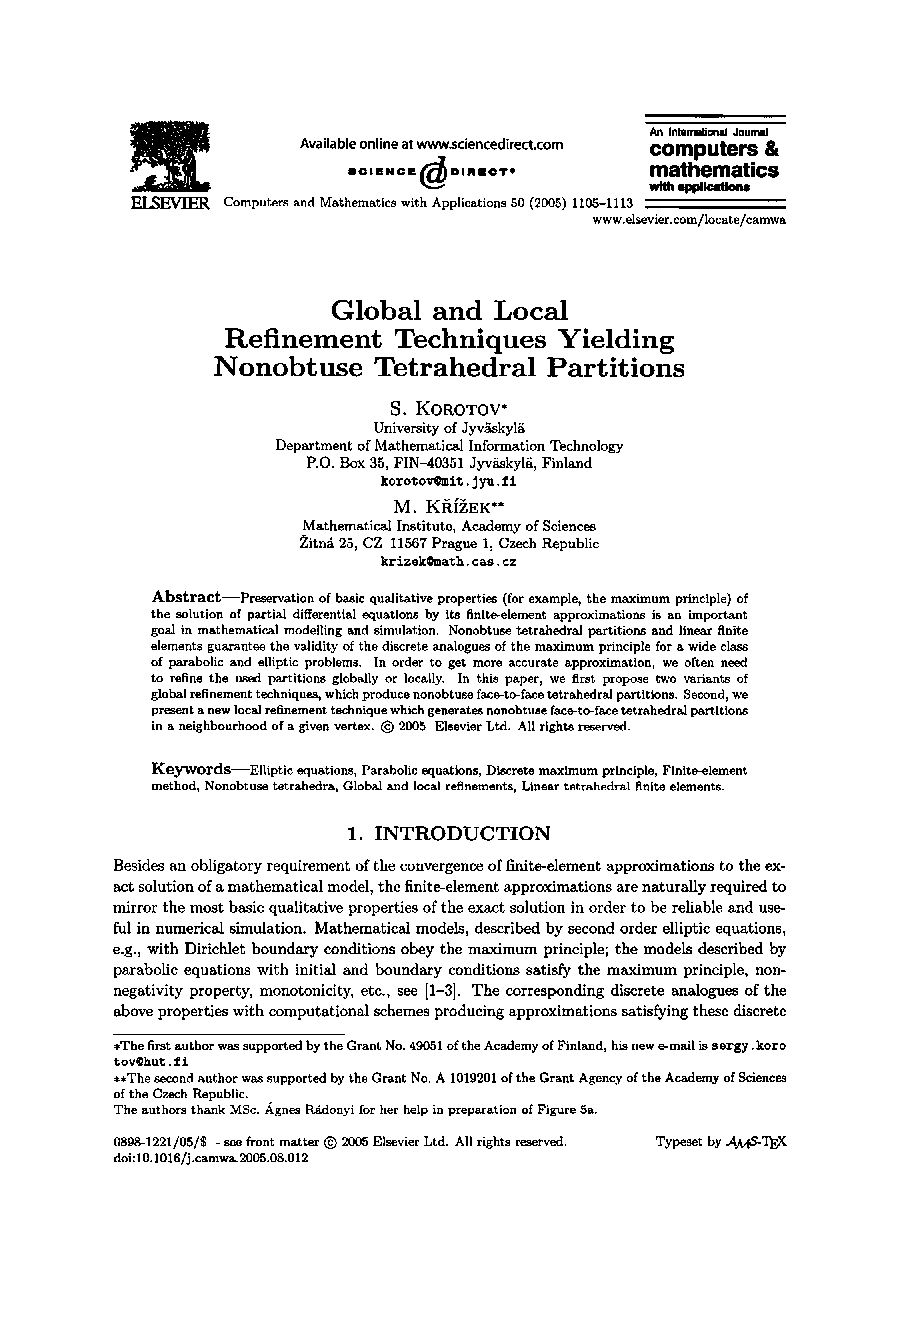 Global and local refinement techniques yielding nonobtuse tetrahedral partitions